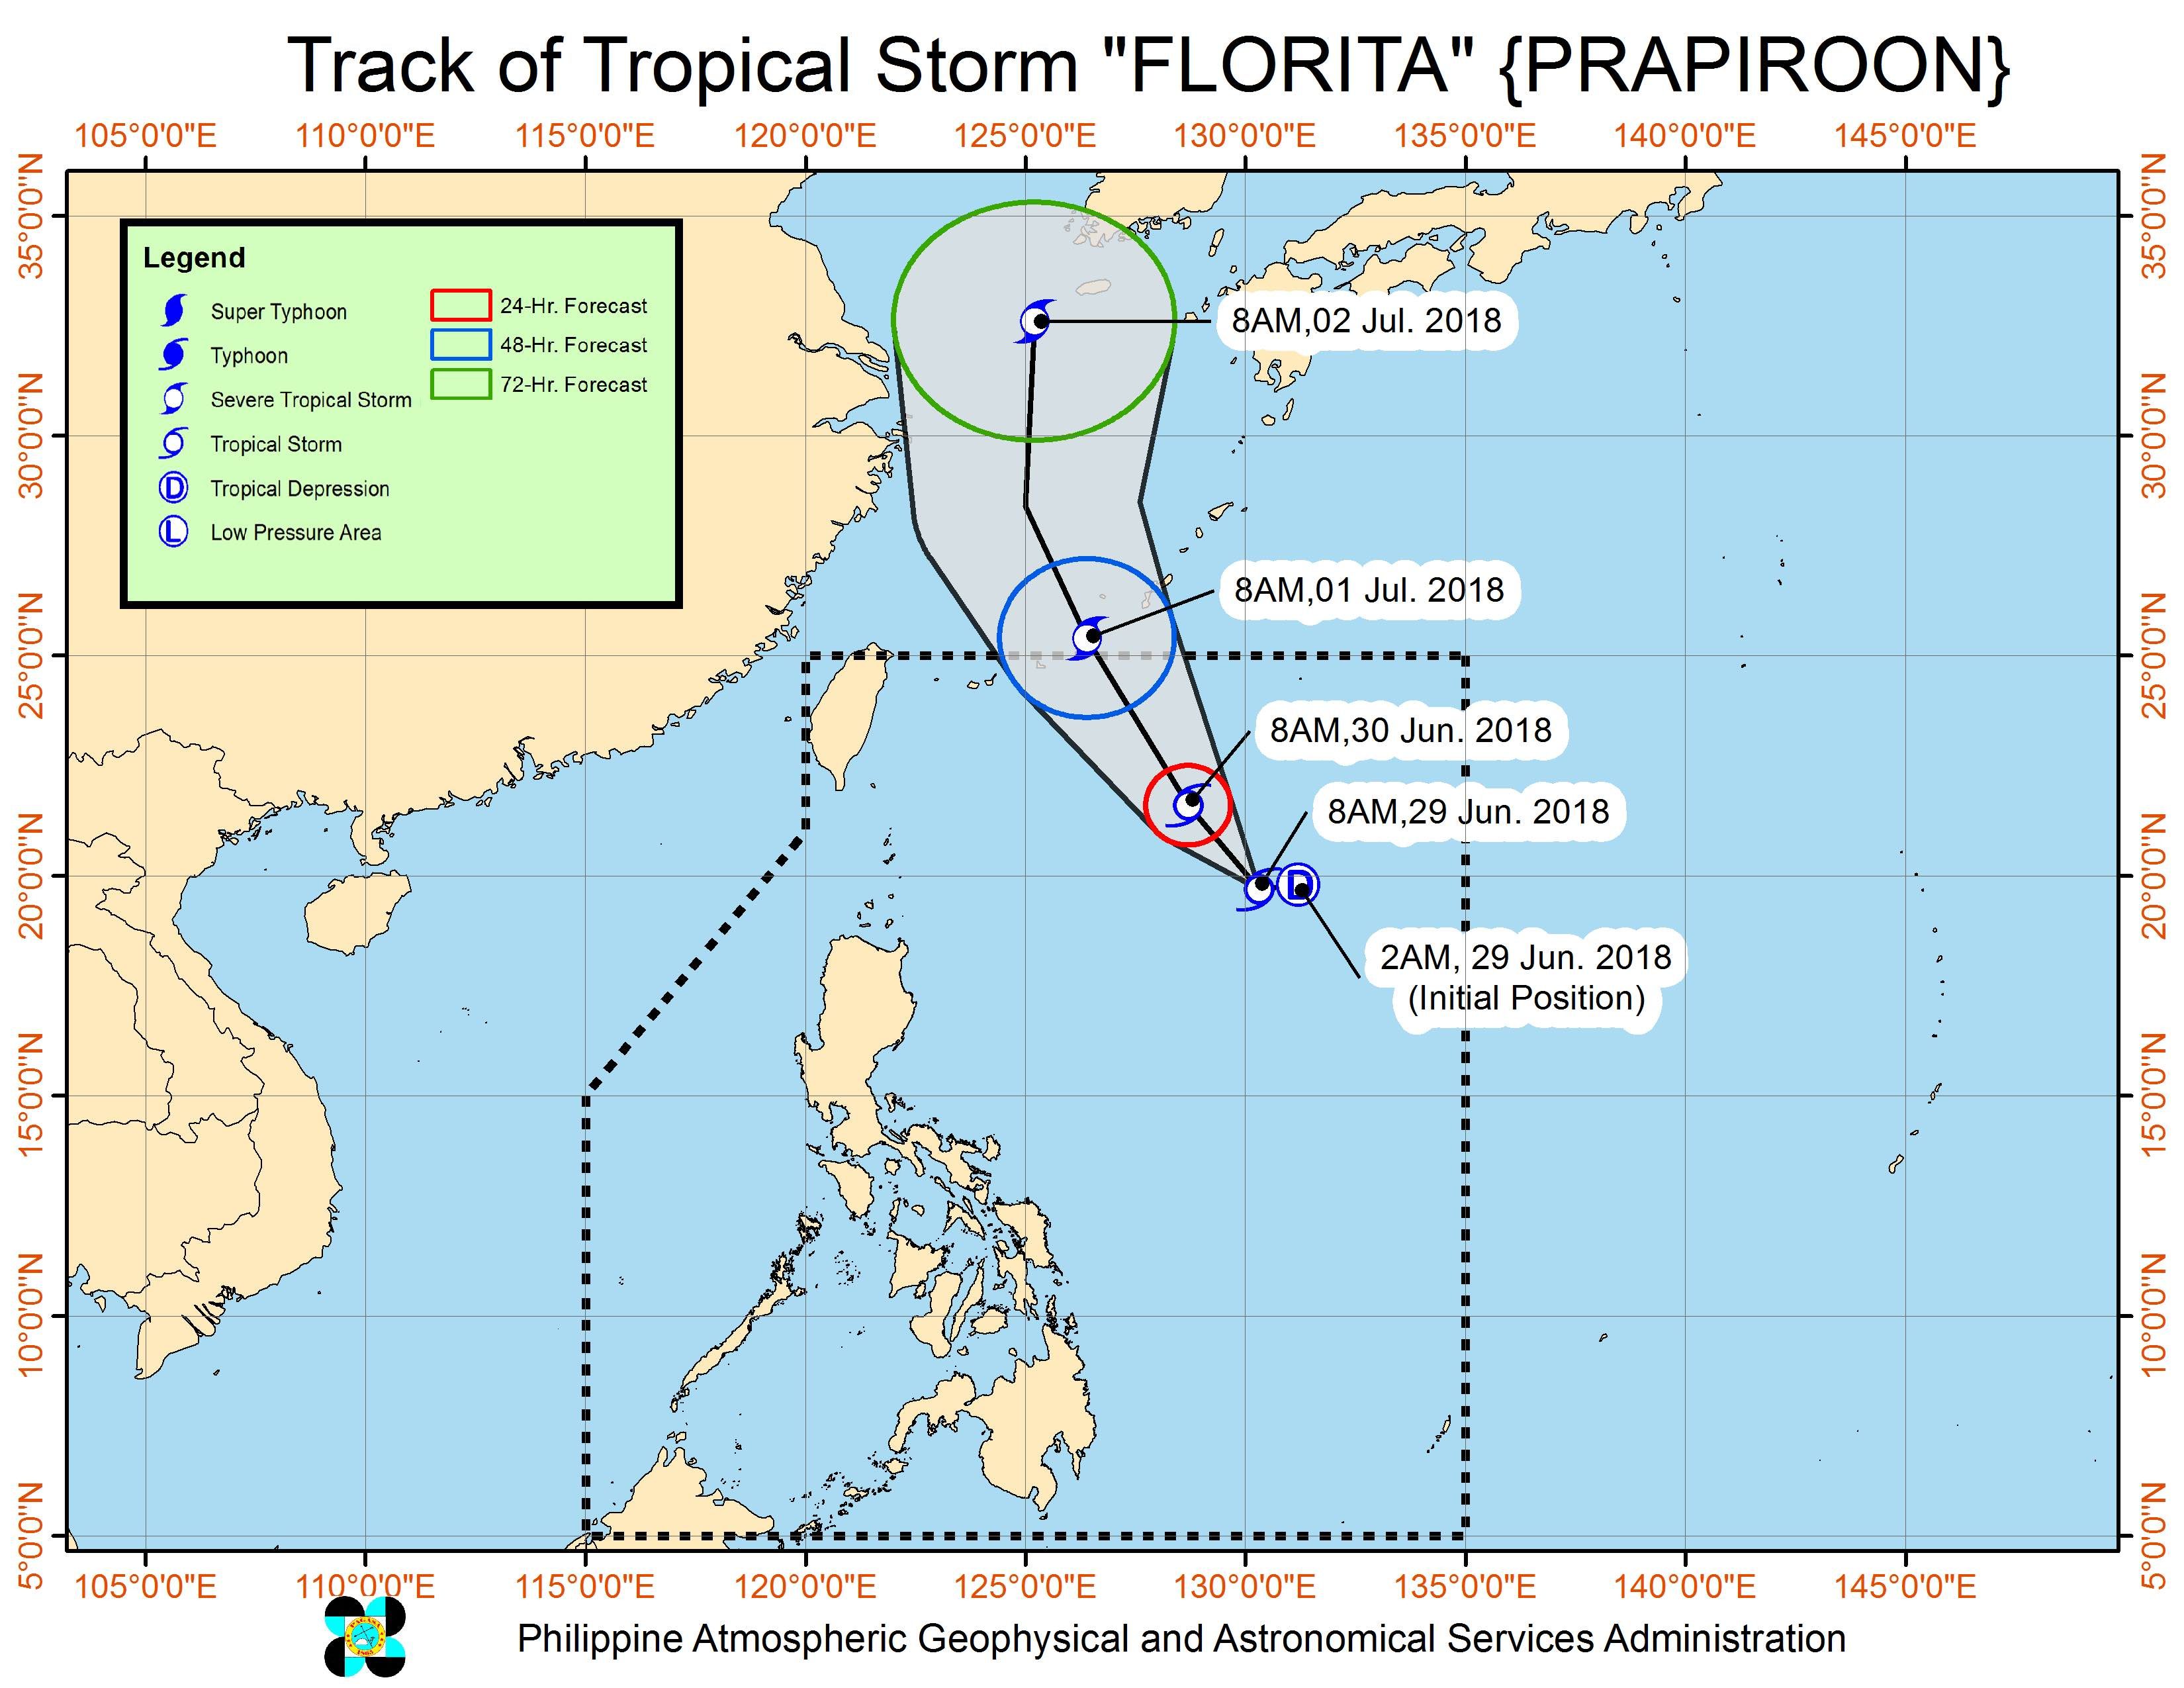 Forecast track of Tropical Storm Florita (Prapiroon) as of June 29, 2018, 11 am. Image courtesy of PAGASA 